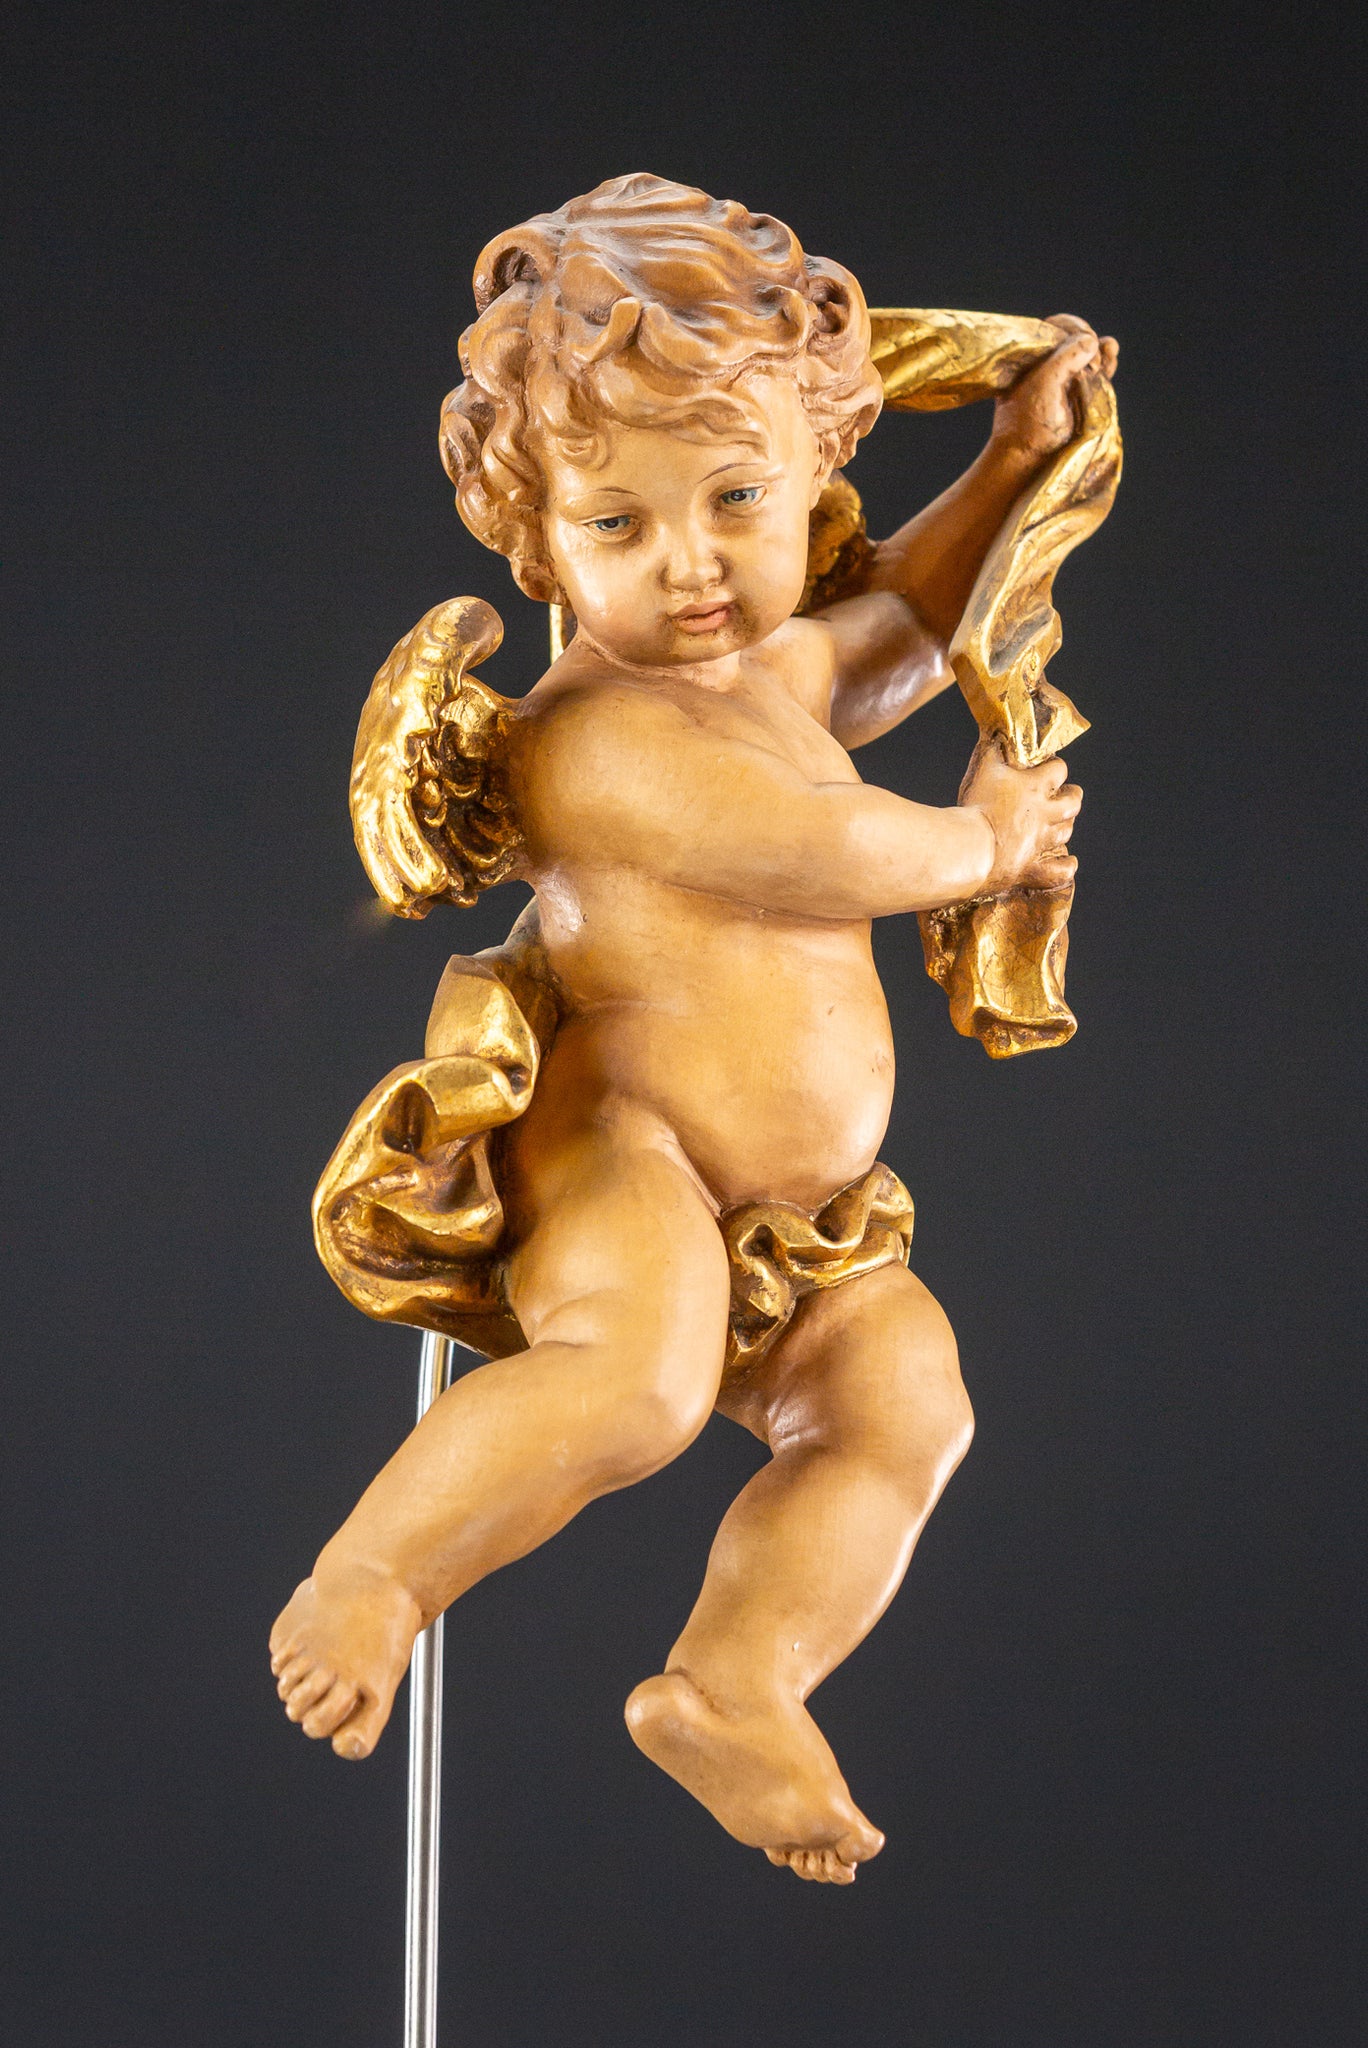 Angel Sculpture | Wood Carving Statue 10.2"